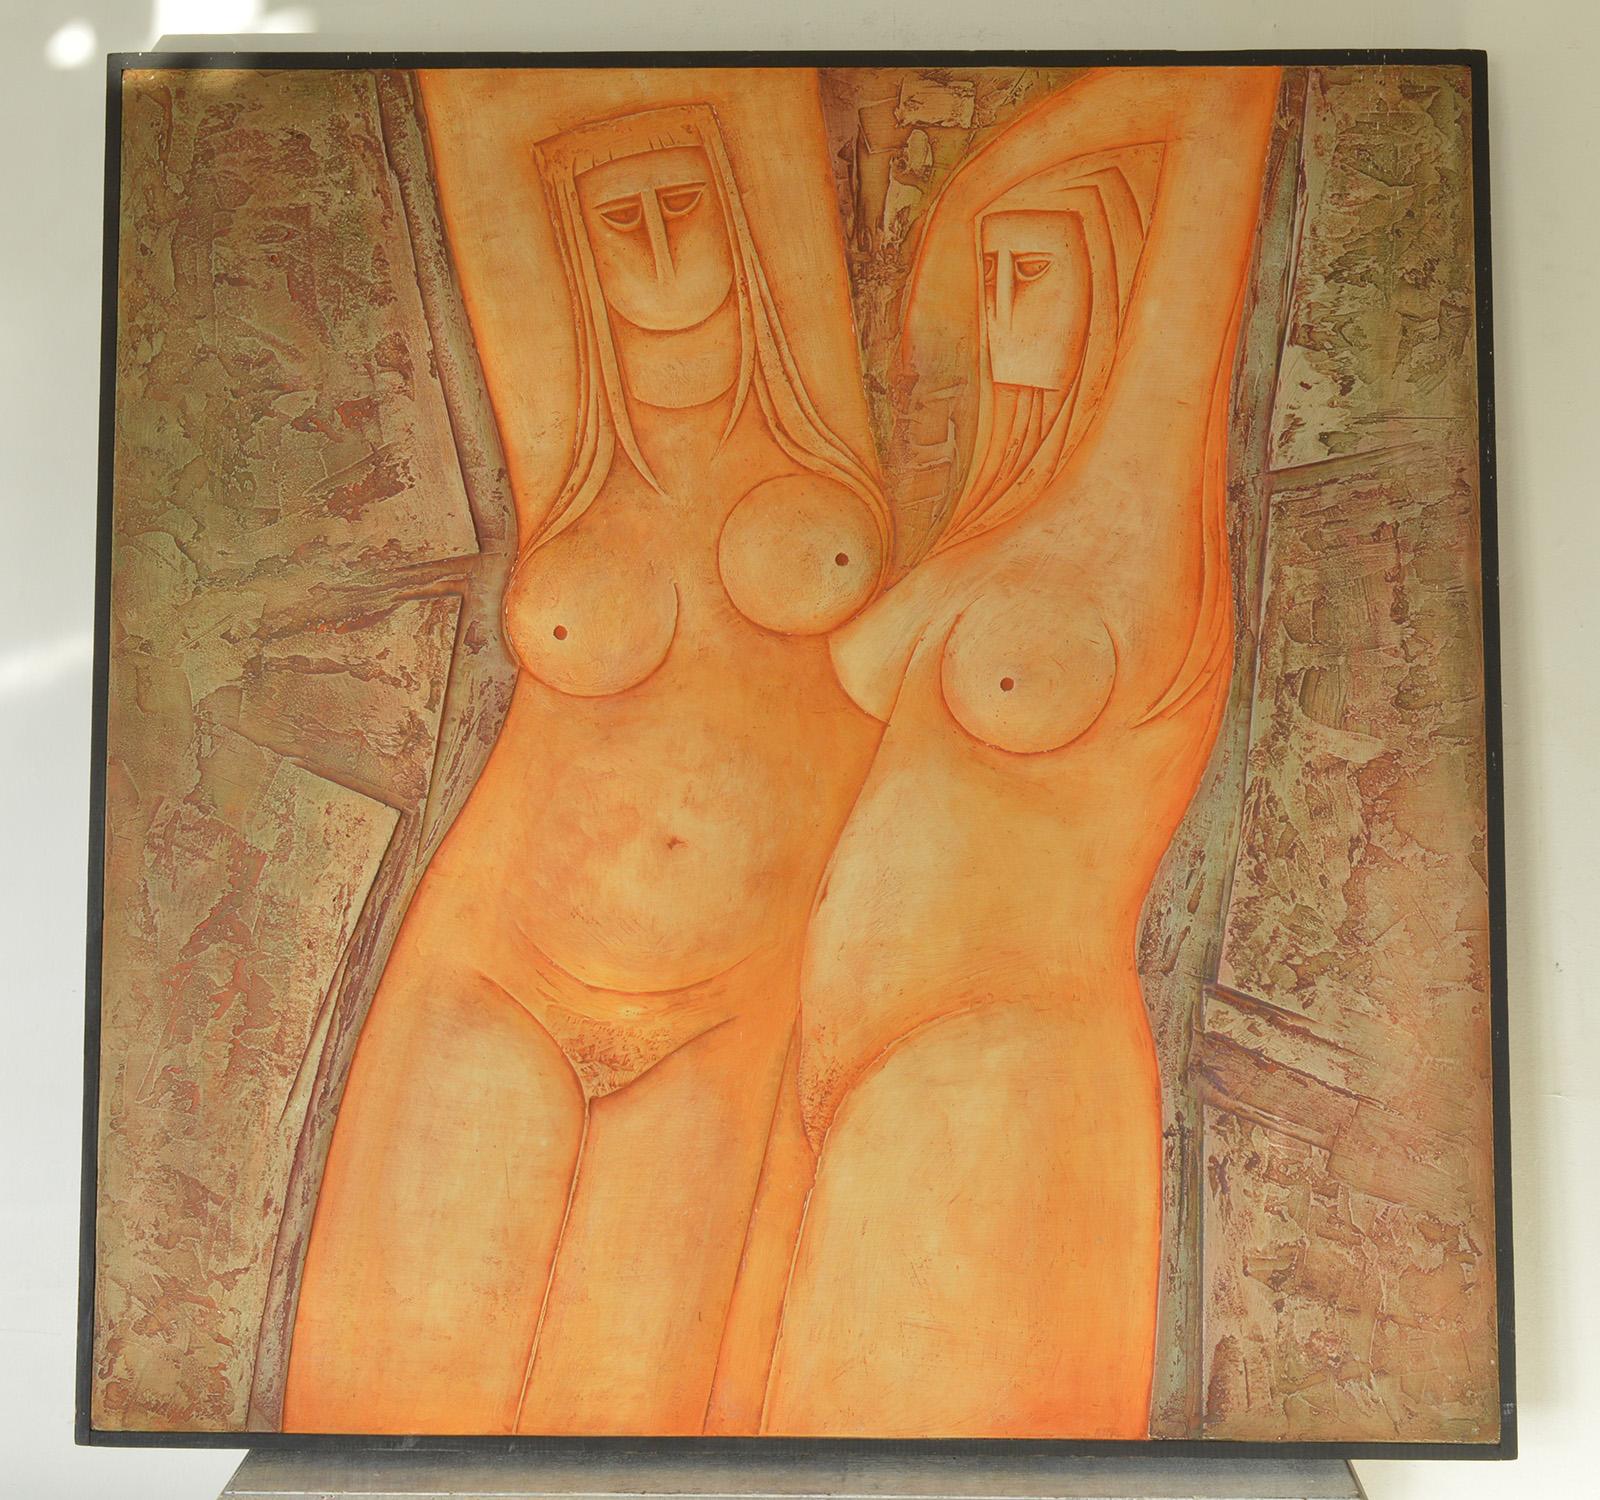 Art Deco Large Nude Painted Bas-Relief by Eric Satchwell, 1973